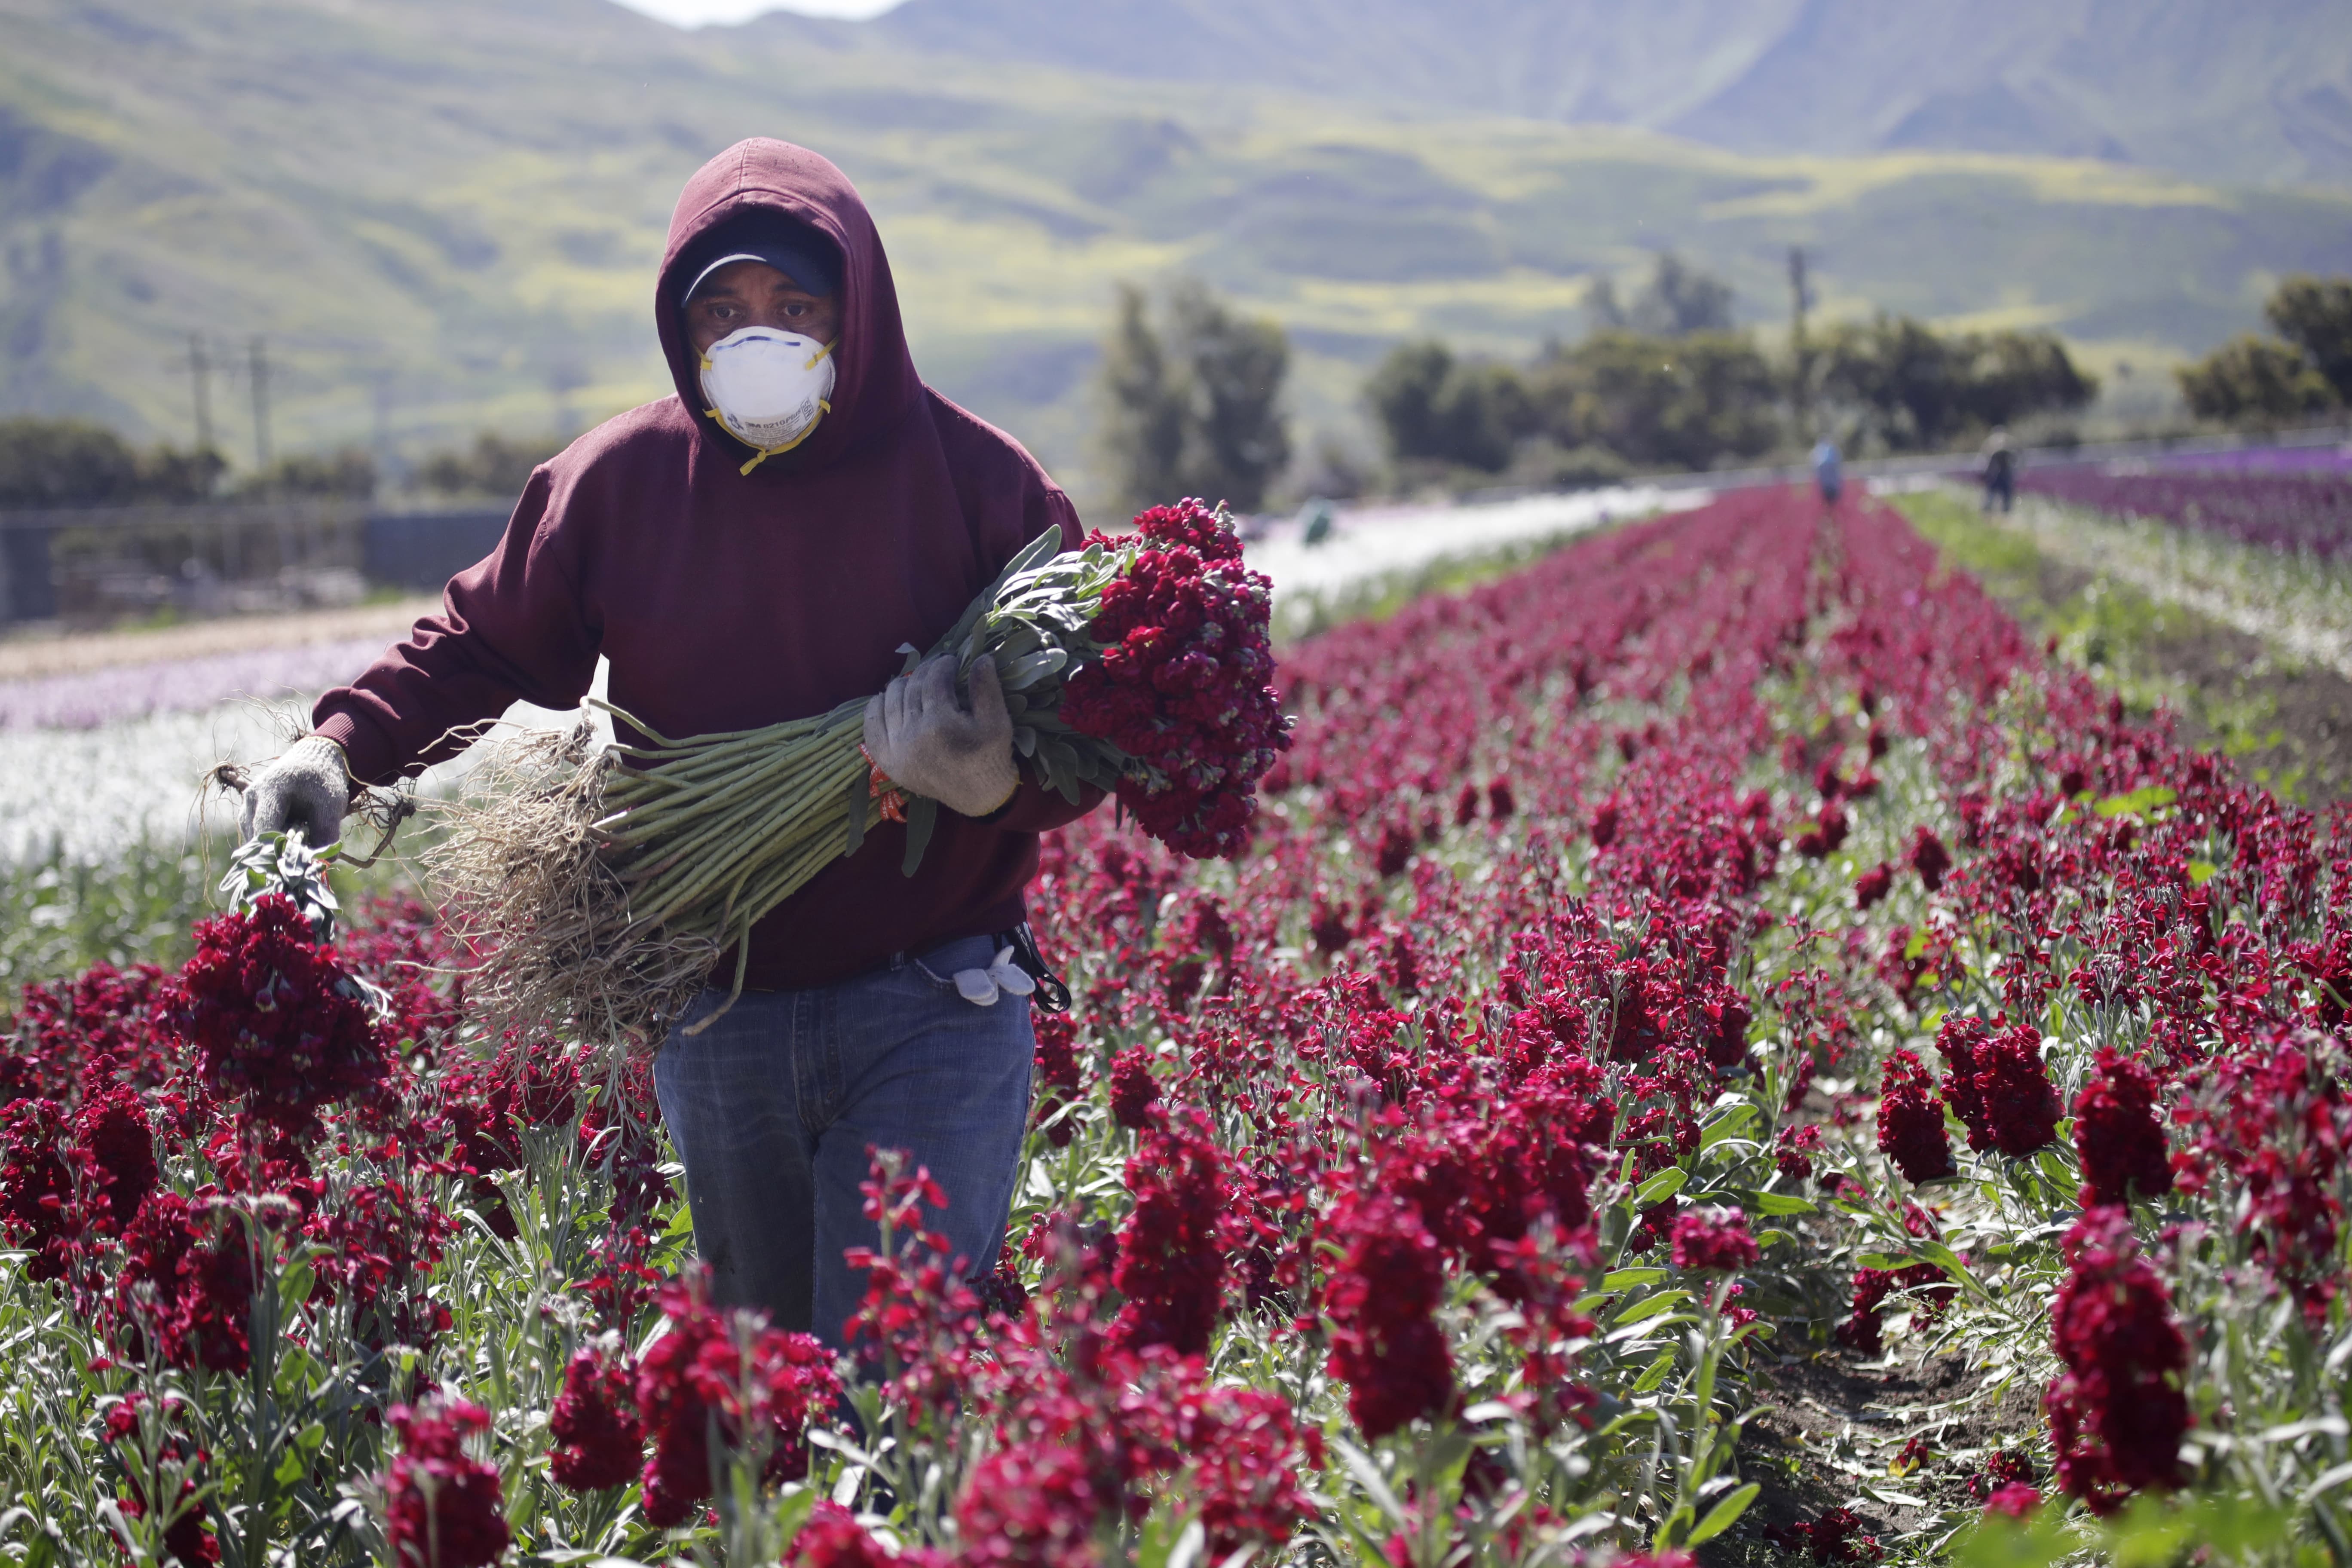 A farmworker, considered an essential worker under the current COVID-19 pandemic guidelines, wears a mask as he works at a flower farm Wednesday, April 15, 2020, in Santa Paula, Calif. (April 2020)